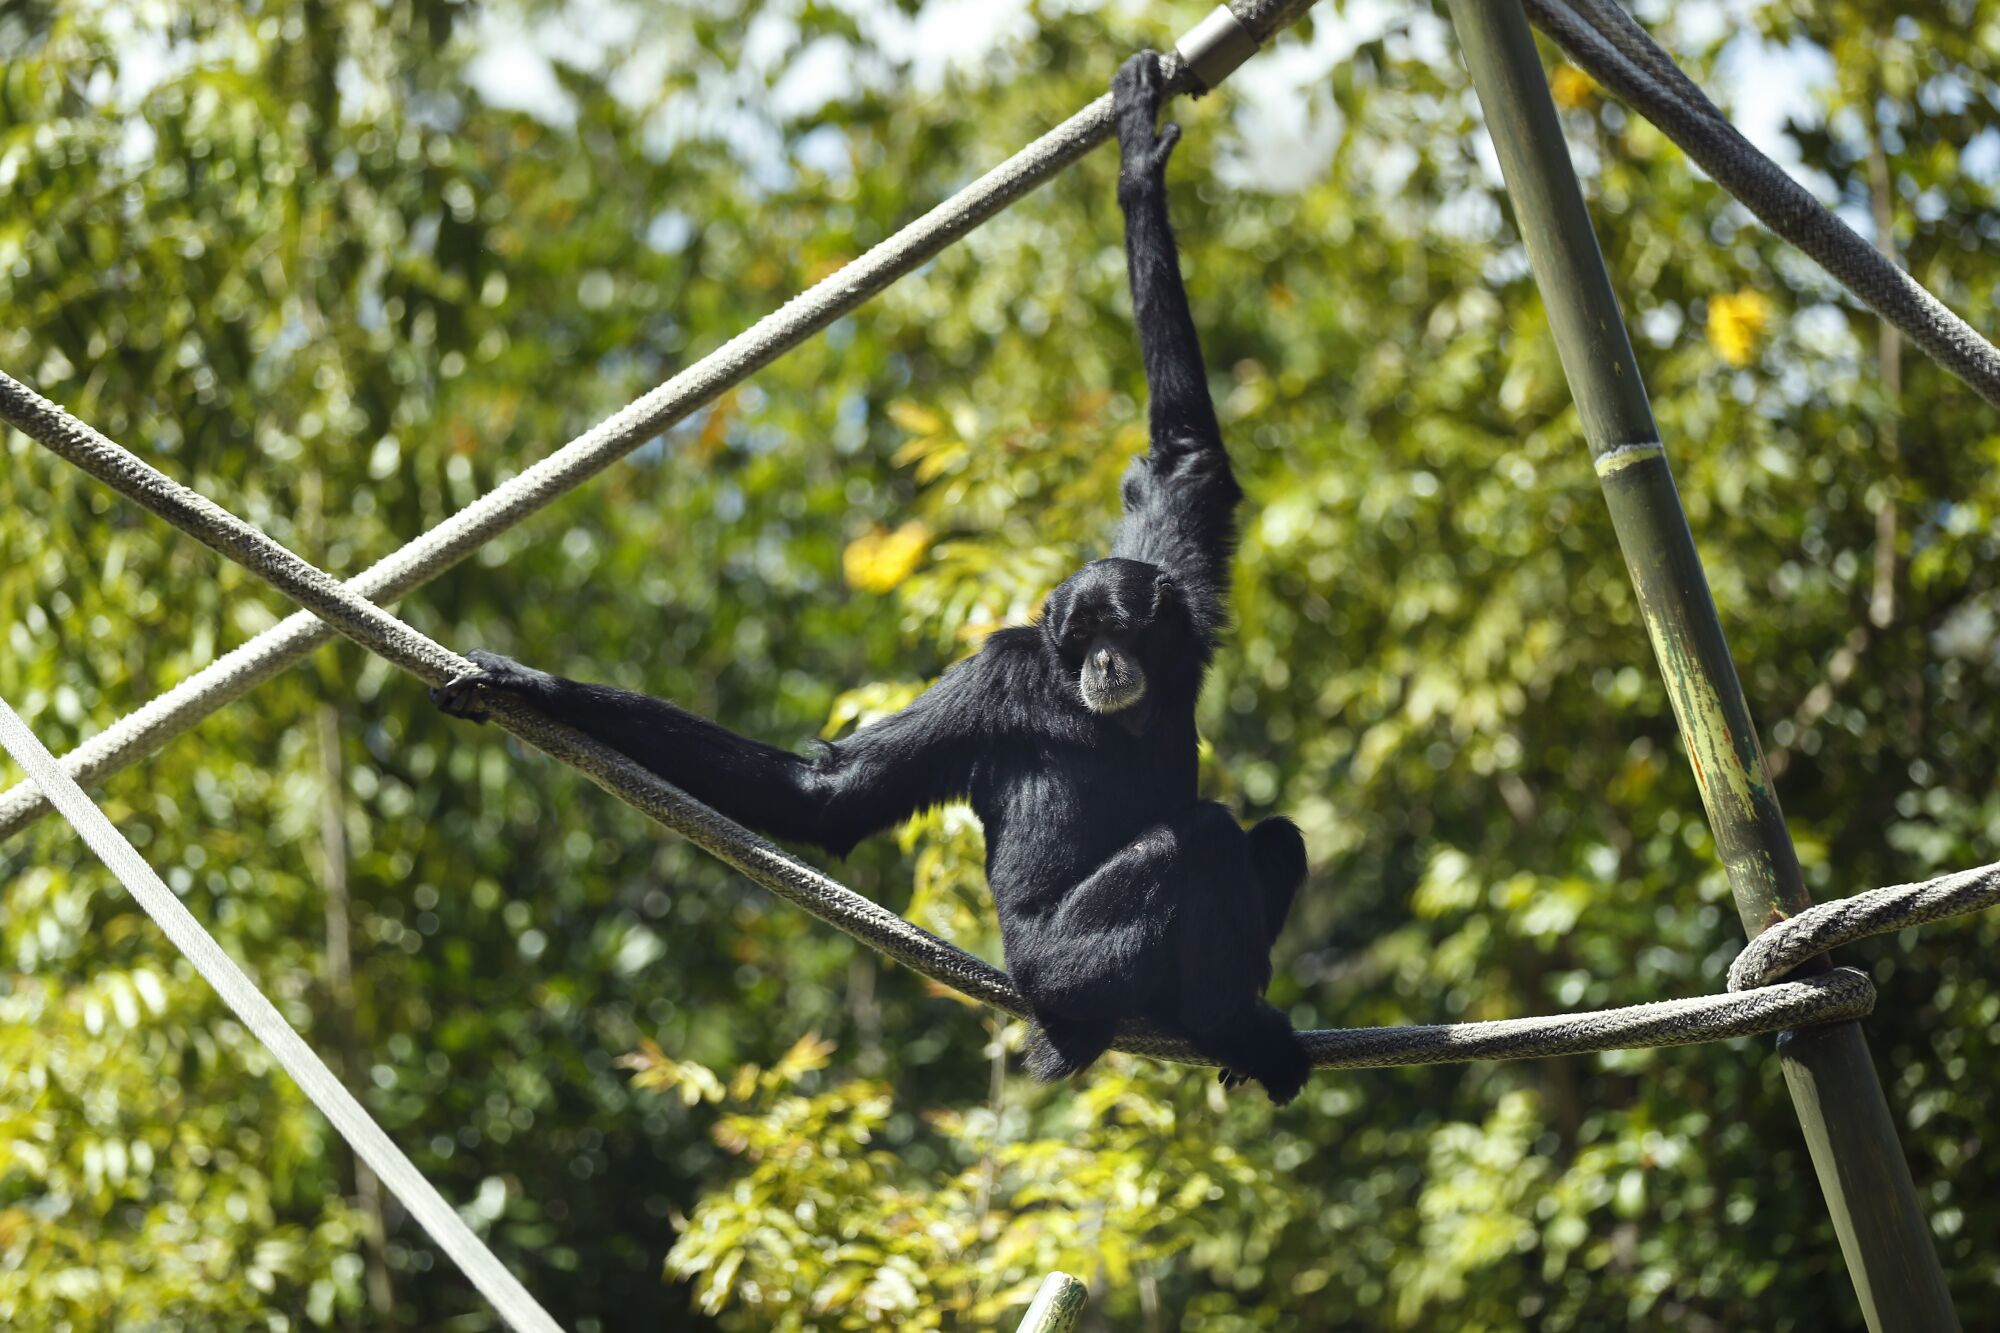 A siamang sits on a structure at the San Diego Zoo on May 19, 2020. The zoo has been closed during the coronavirus pandemic but workers have been caring for the animals.